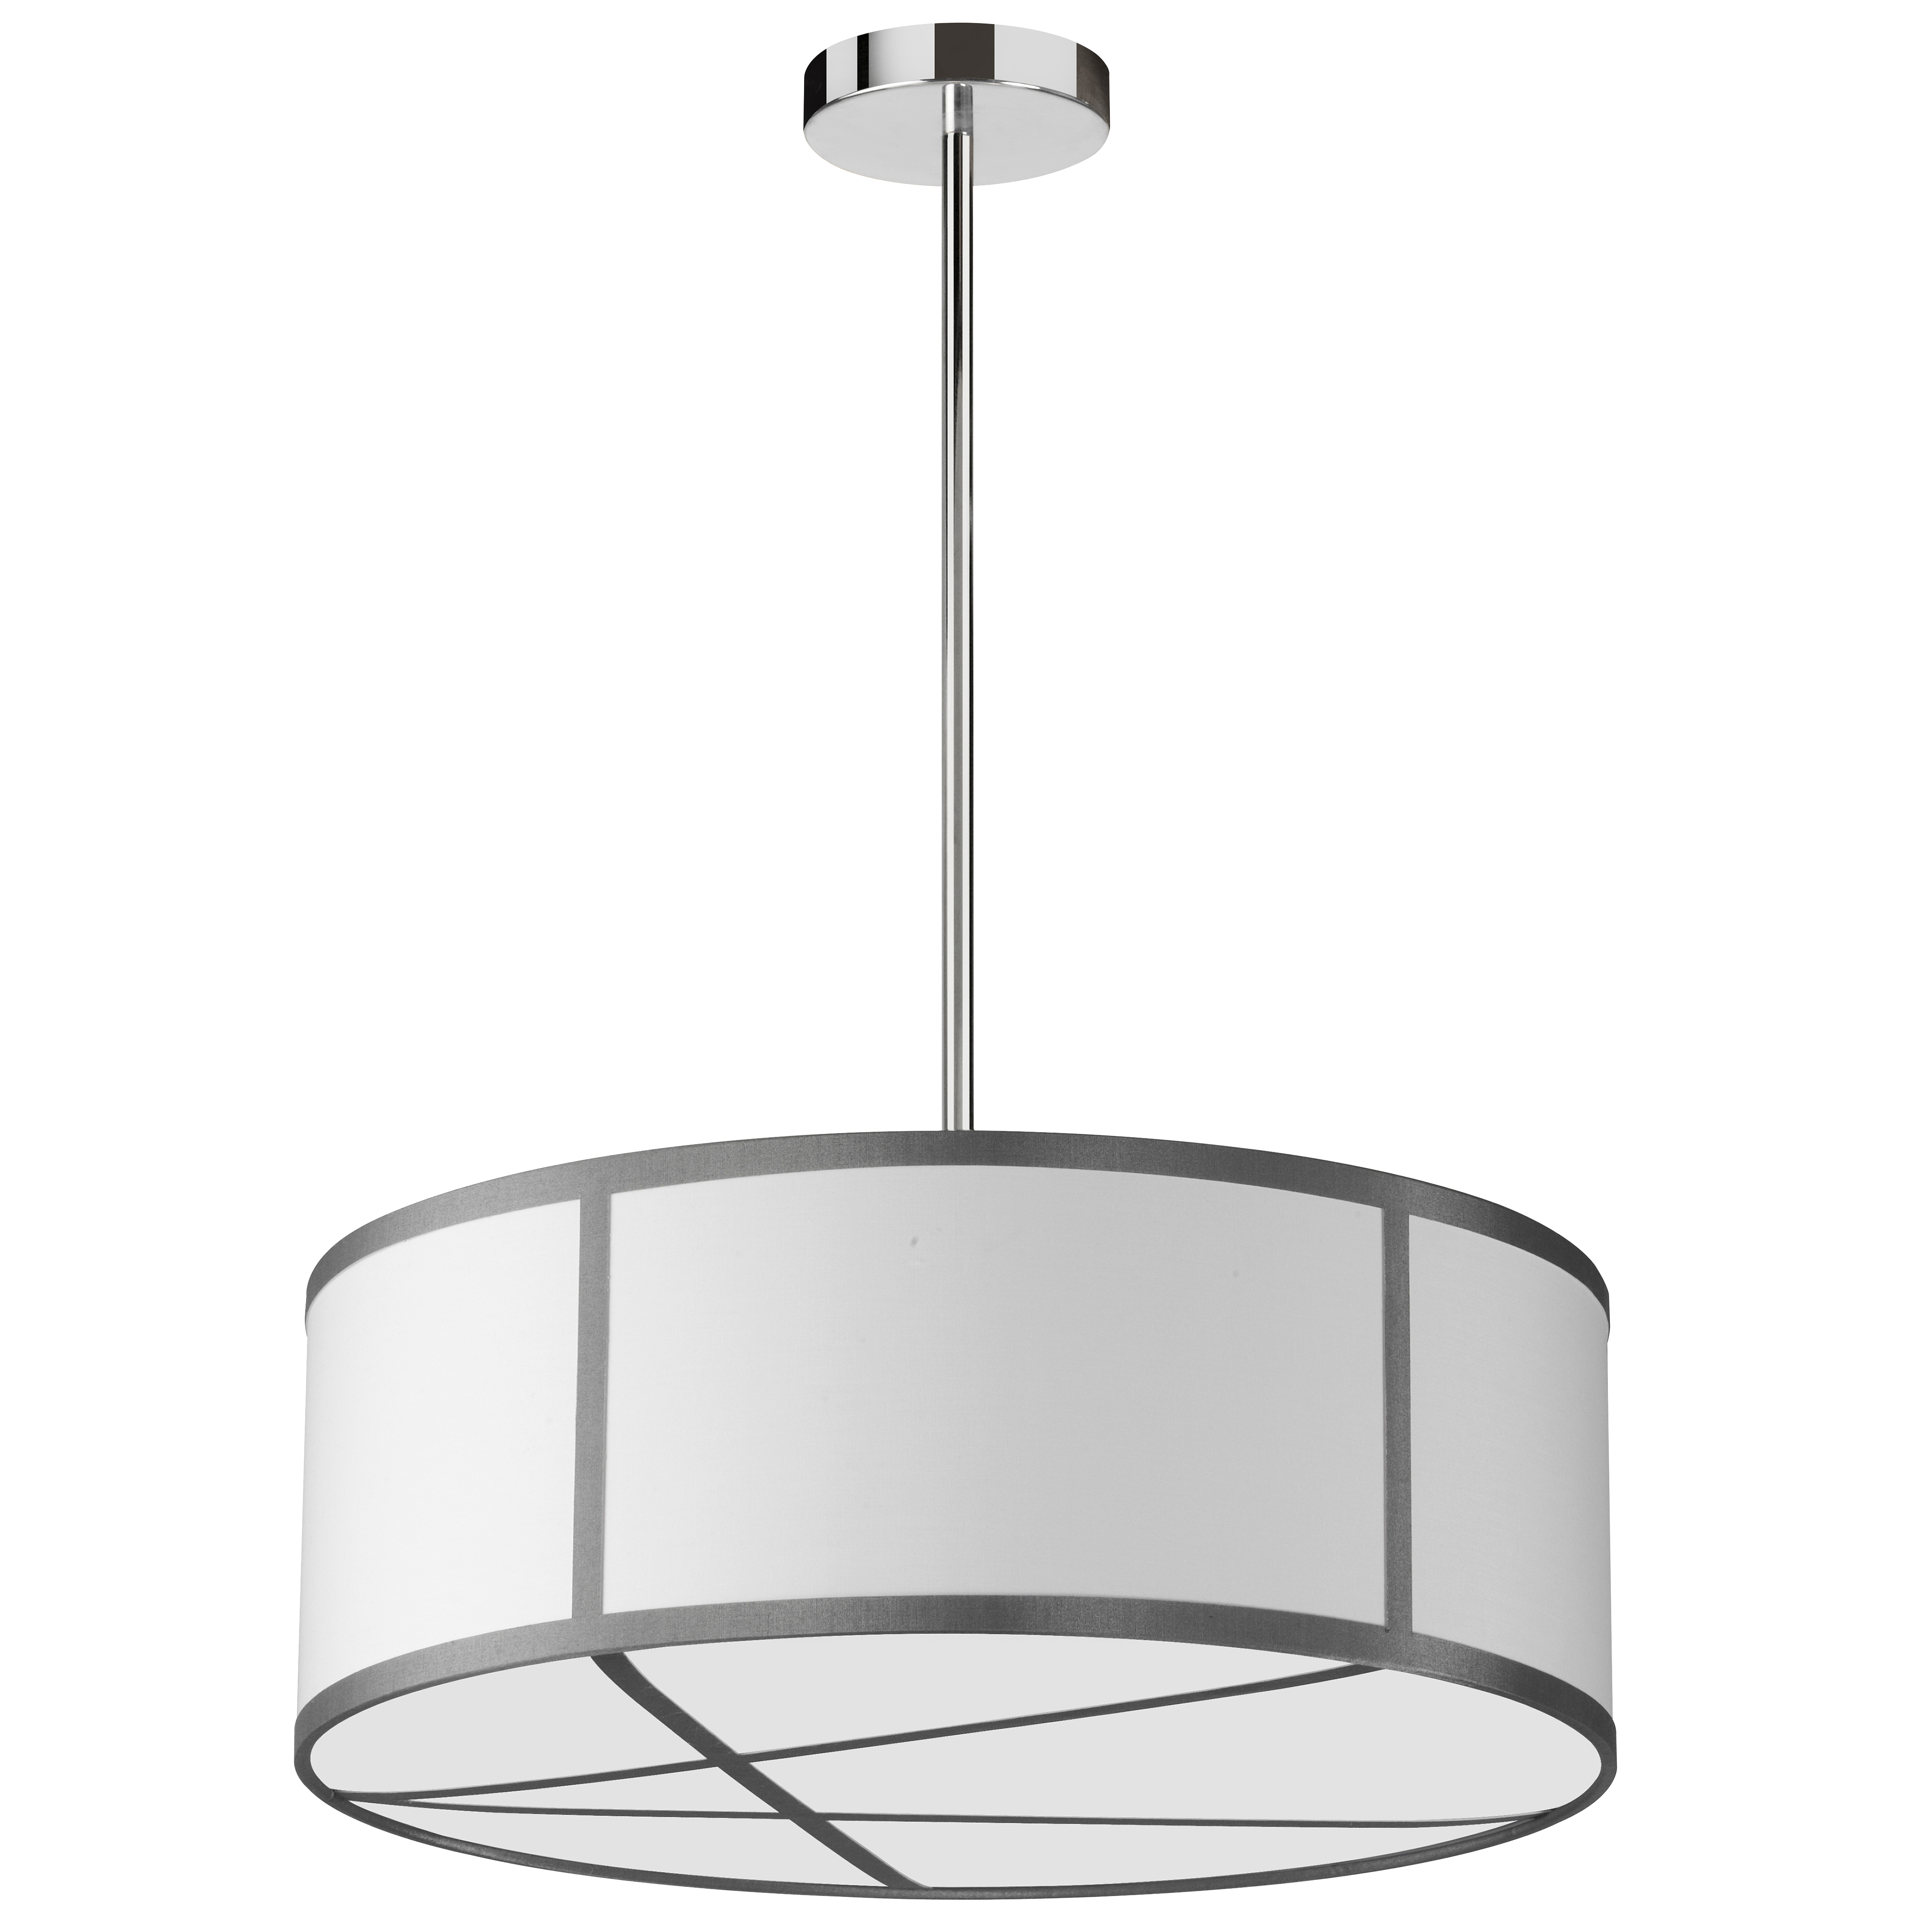 The classic drum style pendant gets a chic makeover in the Pernia family of lighting. The fashionable design, based on contrasts and linear appeal, will draw attention while complementing your contemporary décor. The metal frame in a choice of finishes creates the linear design around and below the fabric drum shade, available in a range of colors that create an eye-catching contrast. Pernia lighting offers your home a stylish look that will enhance your foyer, living room or dinette.